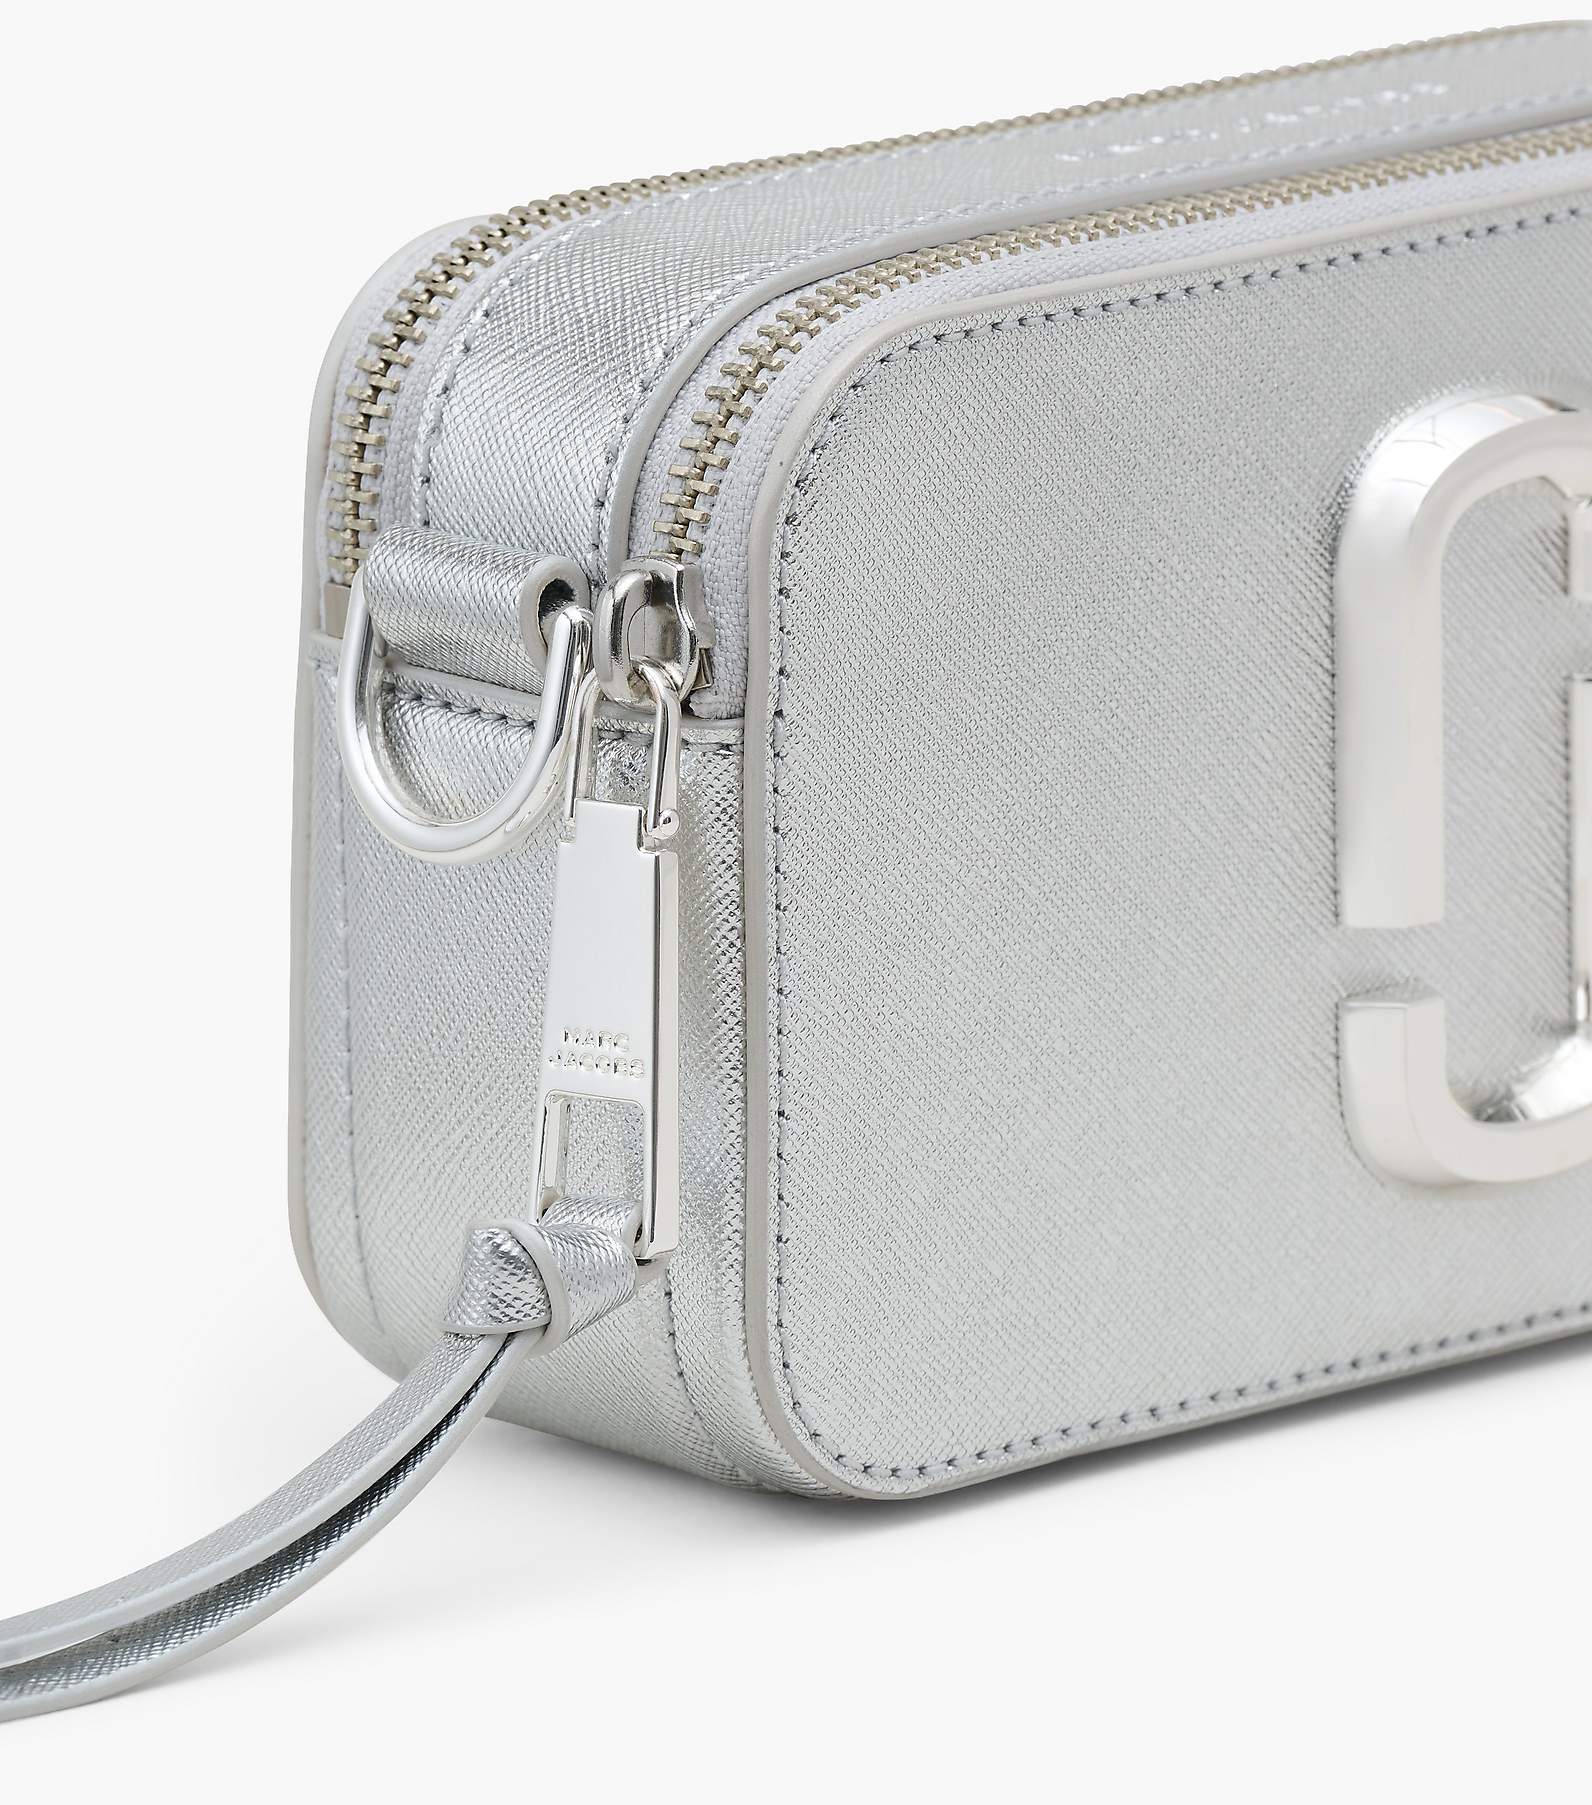 The Snapshot Leather Camera Bag in Grey - Marc Jacobs